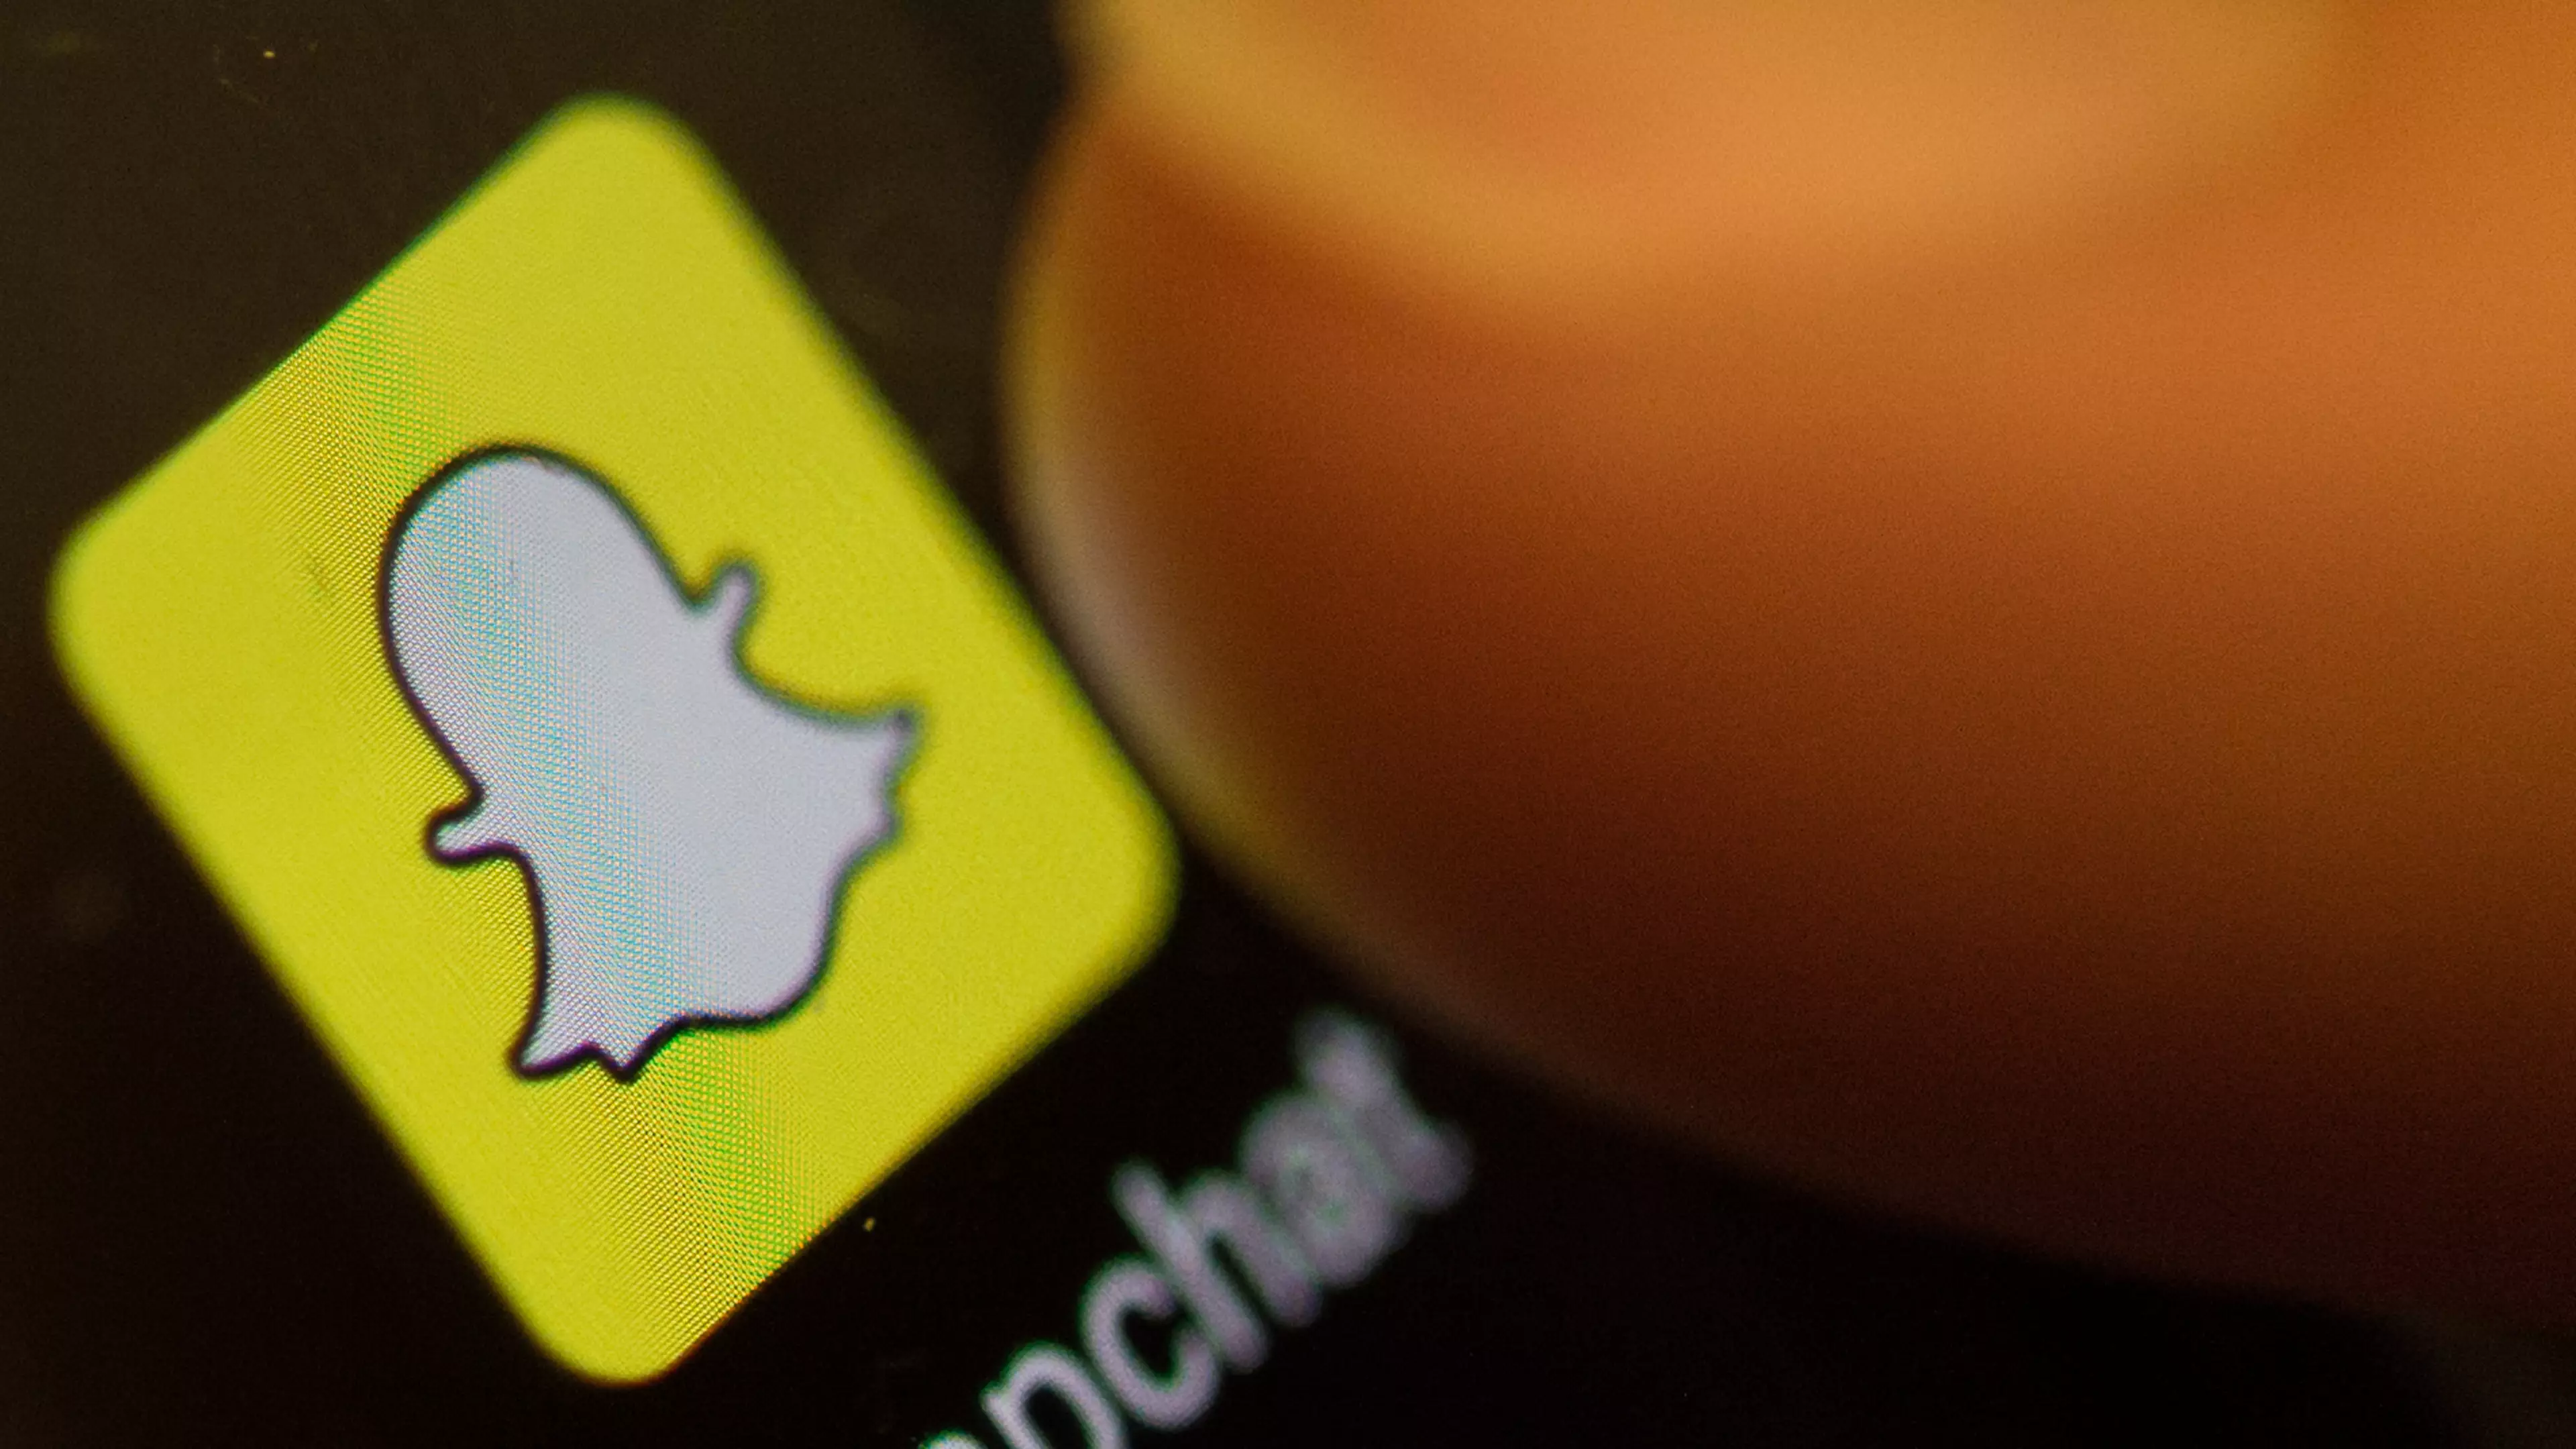 Kidnapped Teenage Girl Rescued After Using Snapchat To Alert Her Friends